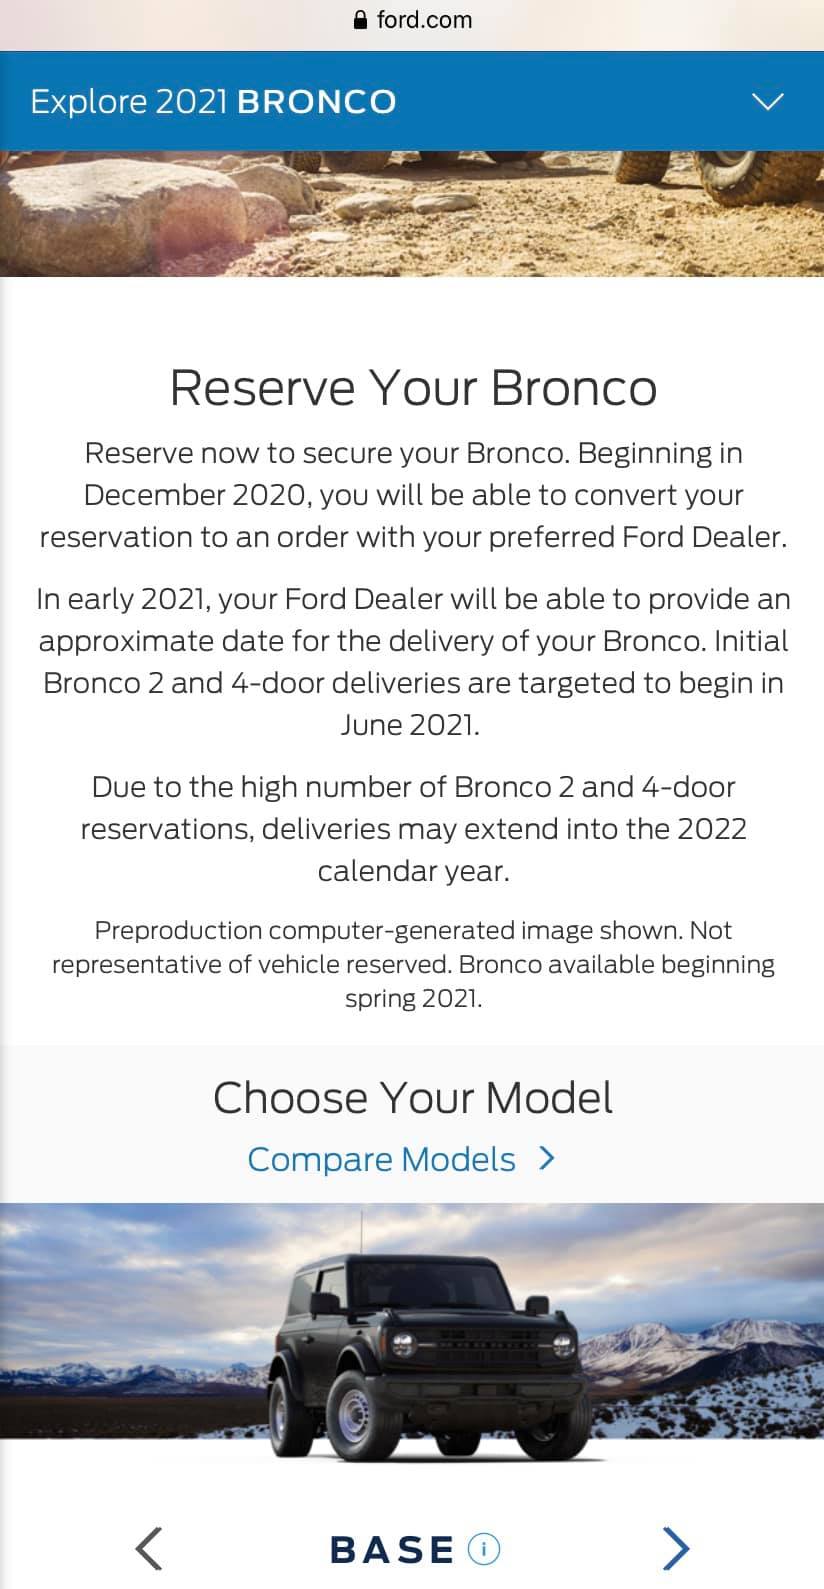 Ford Bronco 2021 Bronco delivery now "targeted to begin June 2021" and possibly into 2022 0A57AE41-D62F-44E7-88B9-7D21FC66C2F9